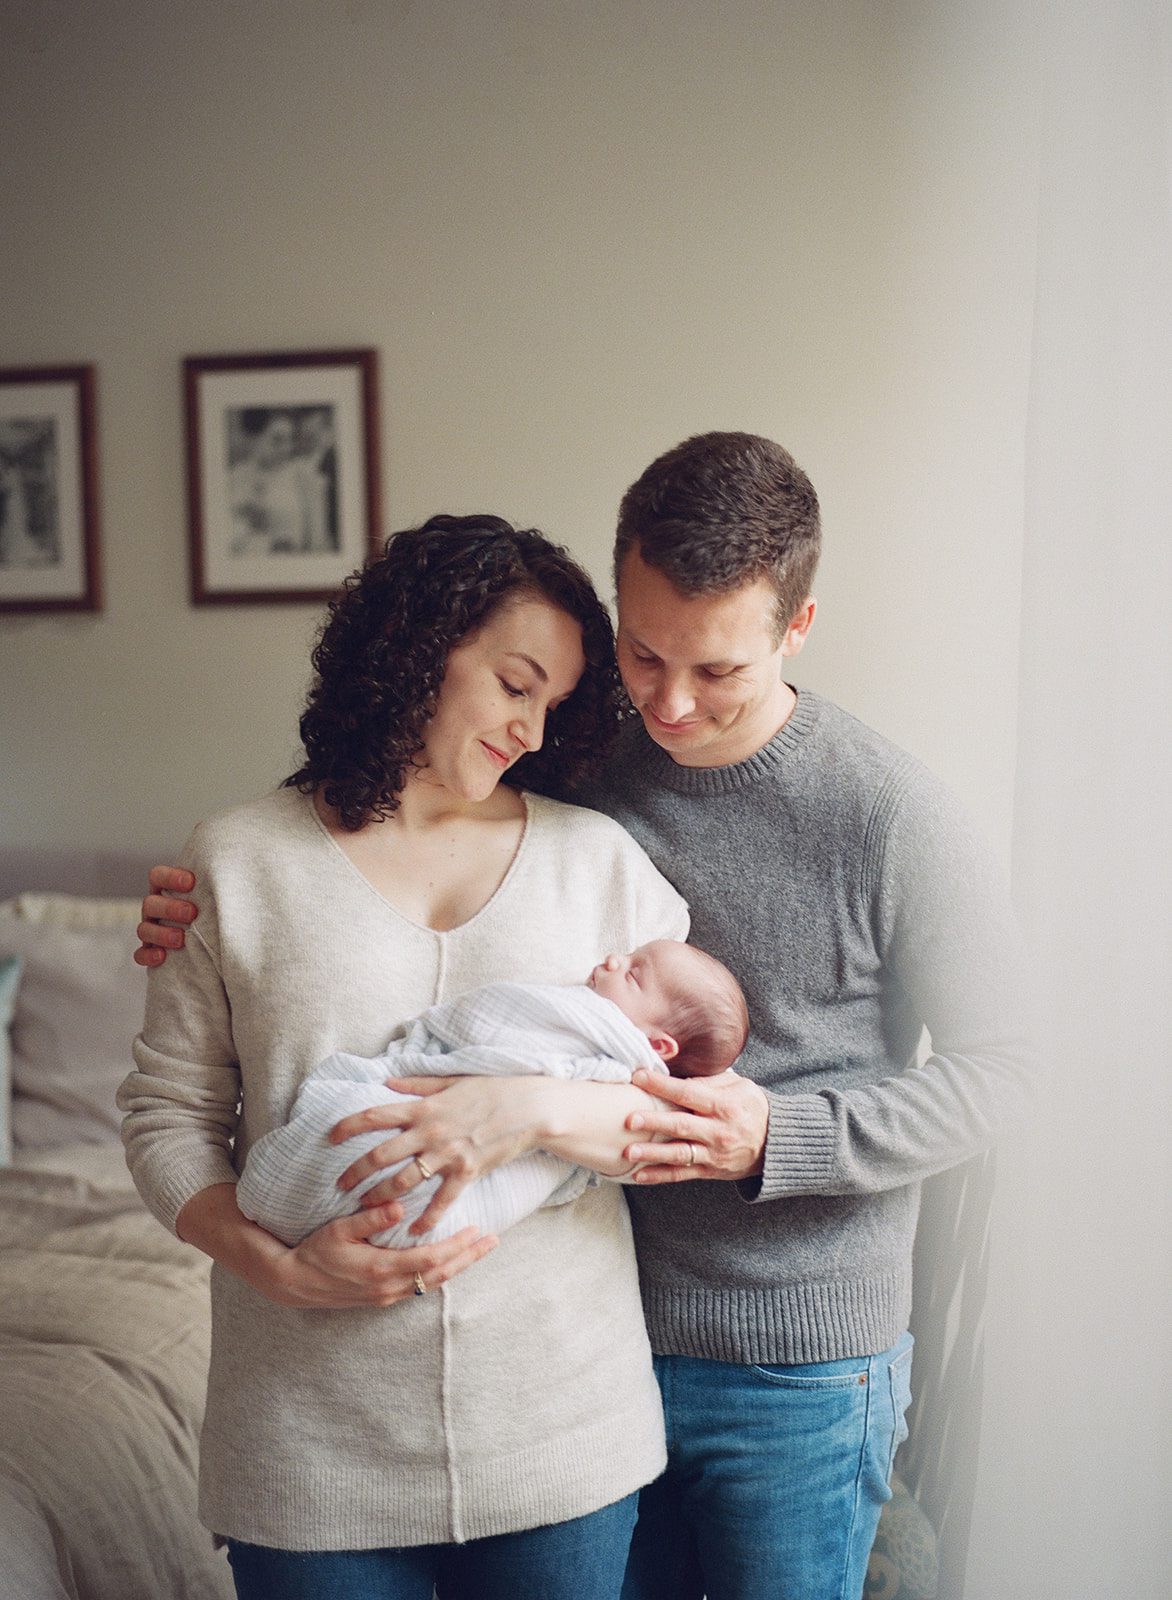 woman holds newborn and smiles at him while man wraps his arm around her